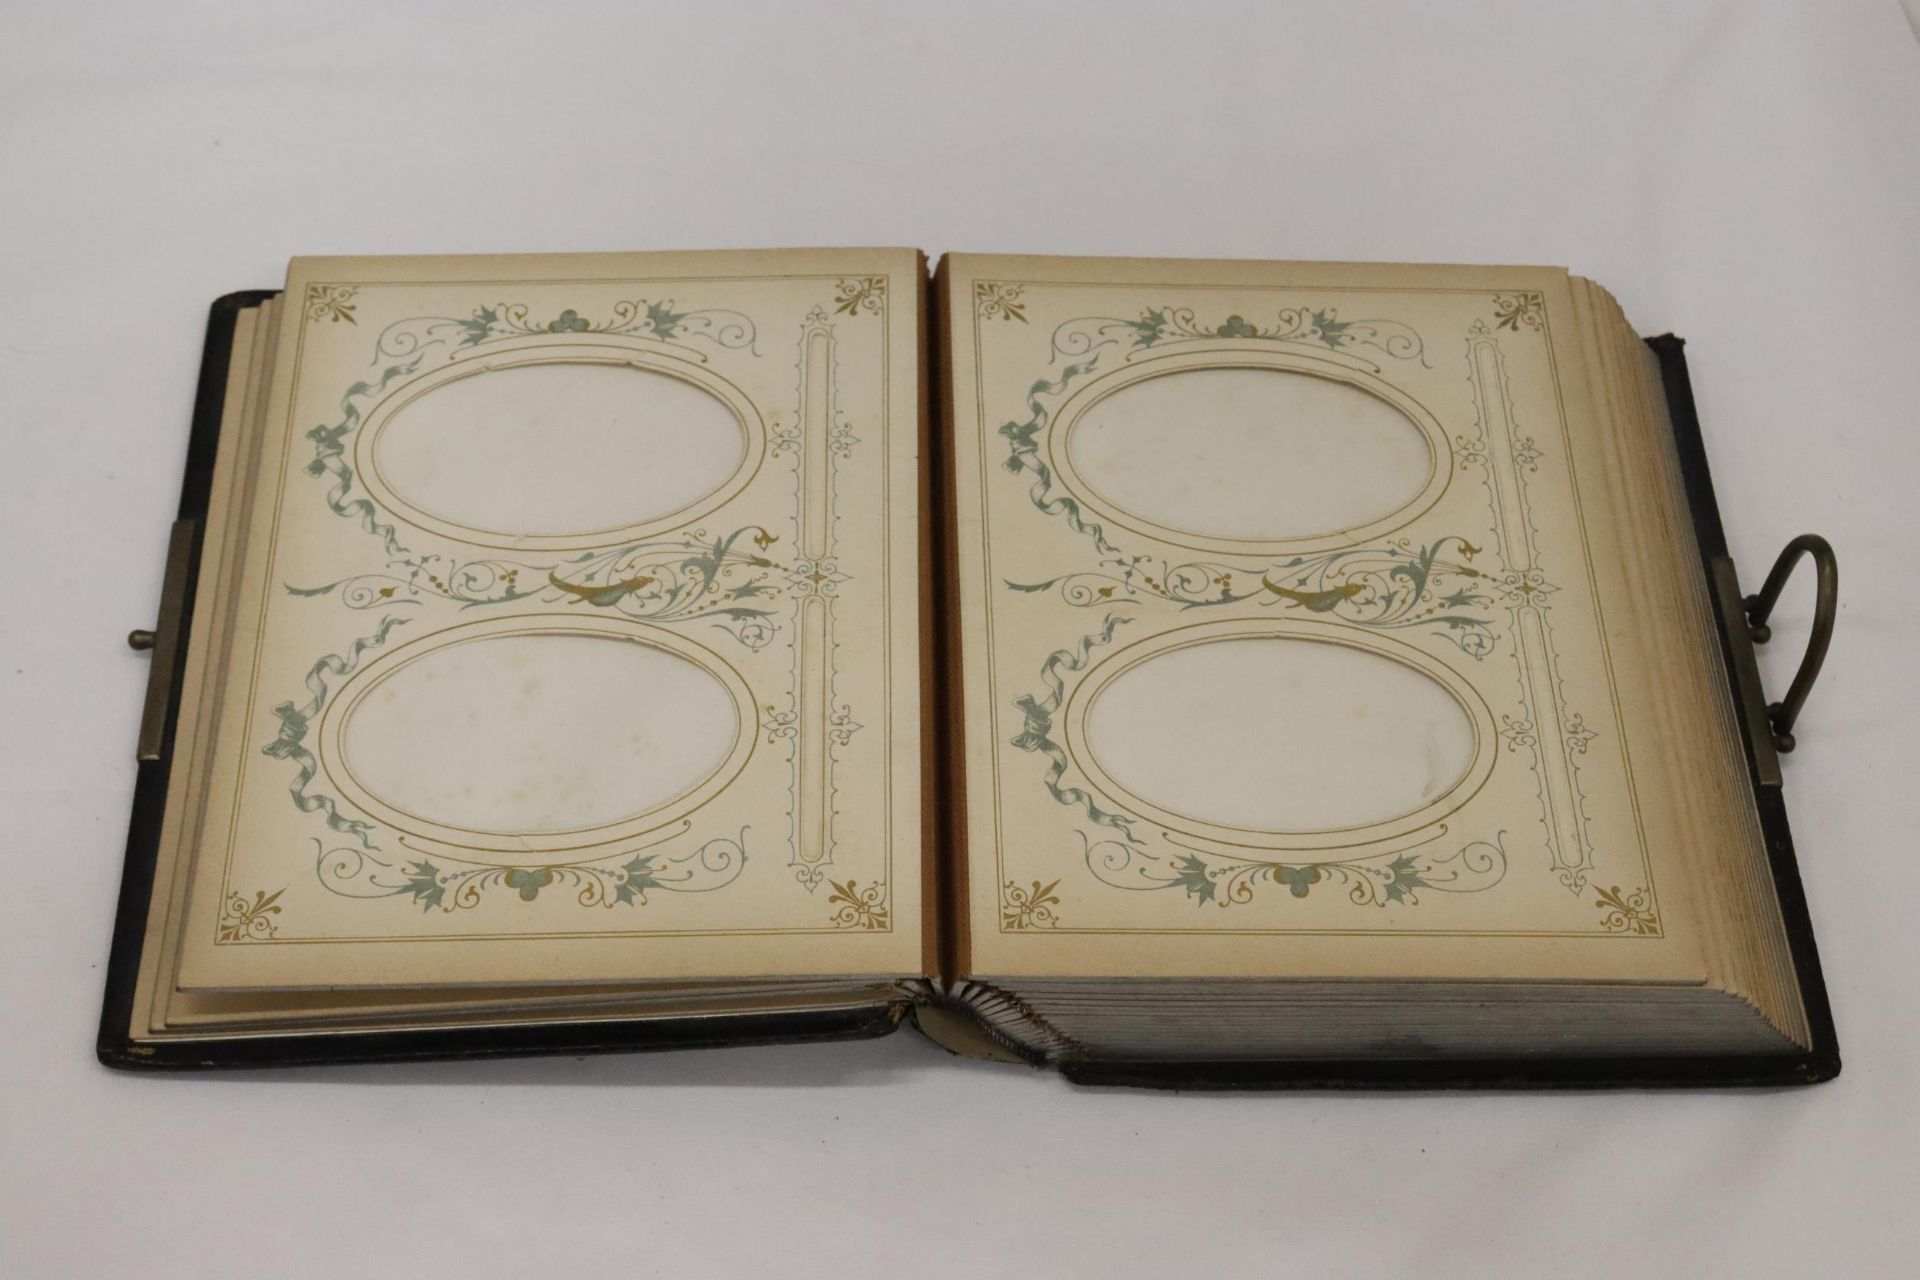 A VICTORIAN LEATHER BOUND PHOTO ALBUM WITH A WHITE METAL SHIELD SHAPED CARTOUCHE TO THE FRONT COVER - Image 3 of 6